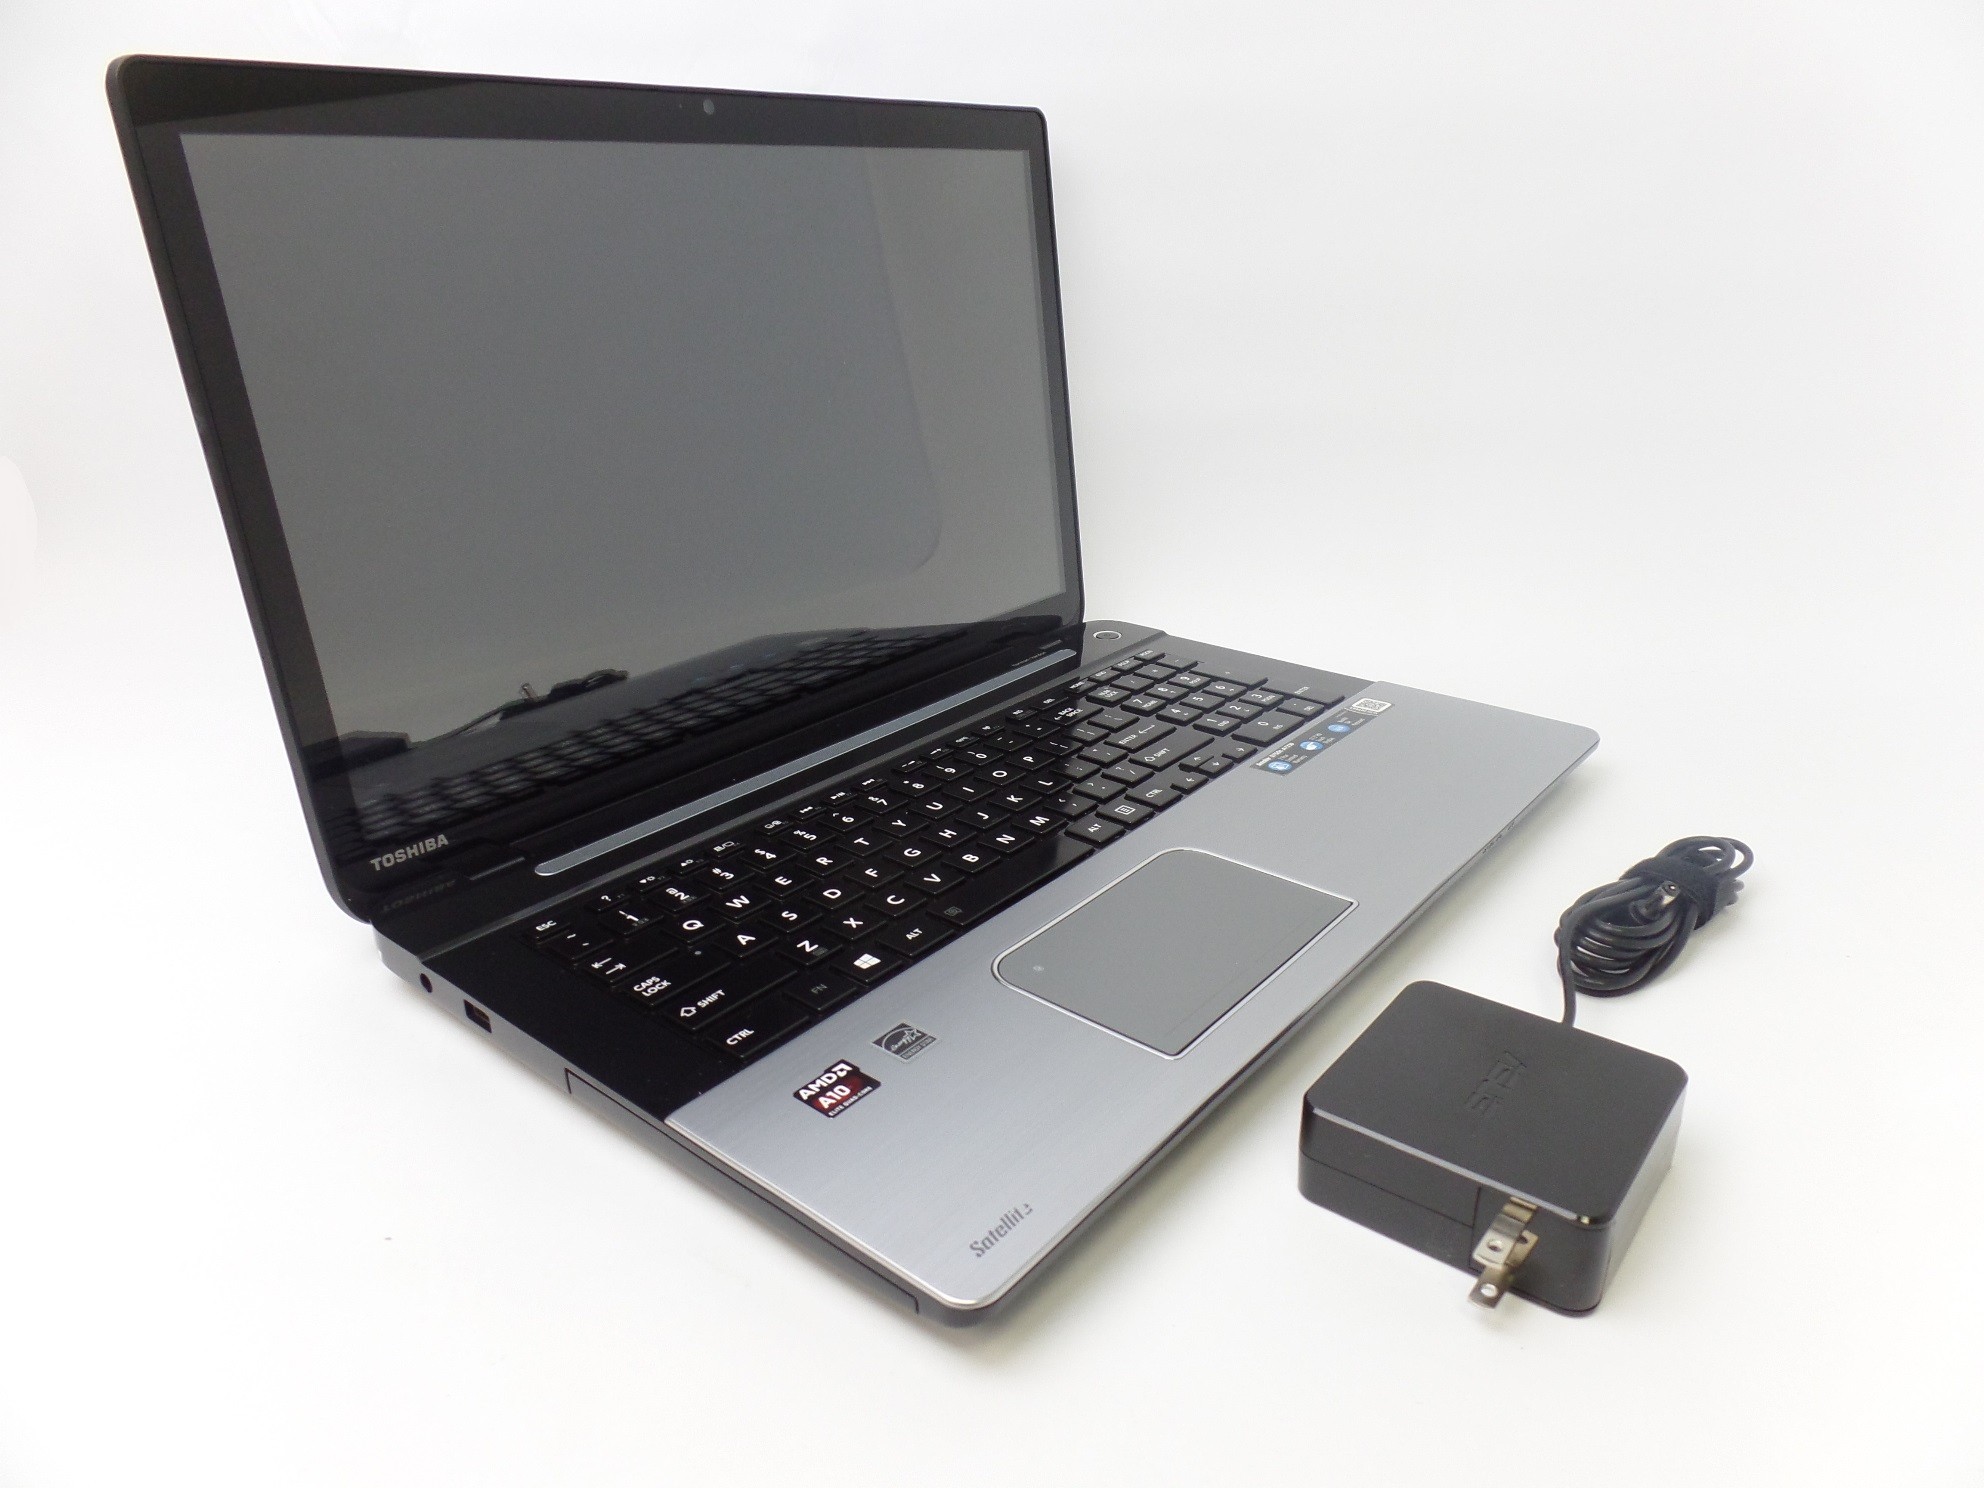 Toshiba Satellite S75Dt-A7330 17.3" HD+ Touch AMD A10-5750M 2.5GHz 12GB 1TB W10H